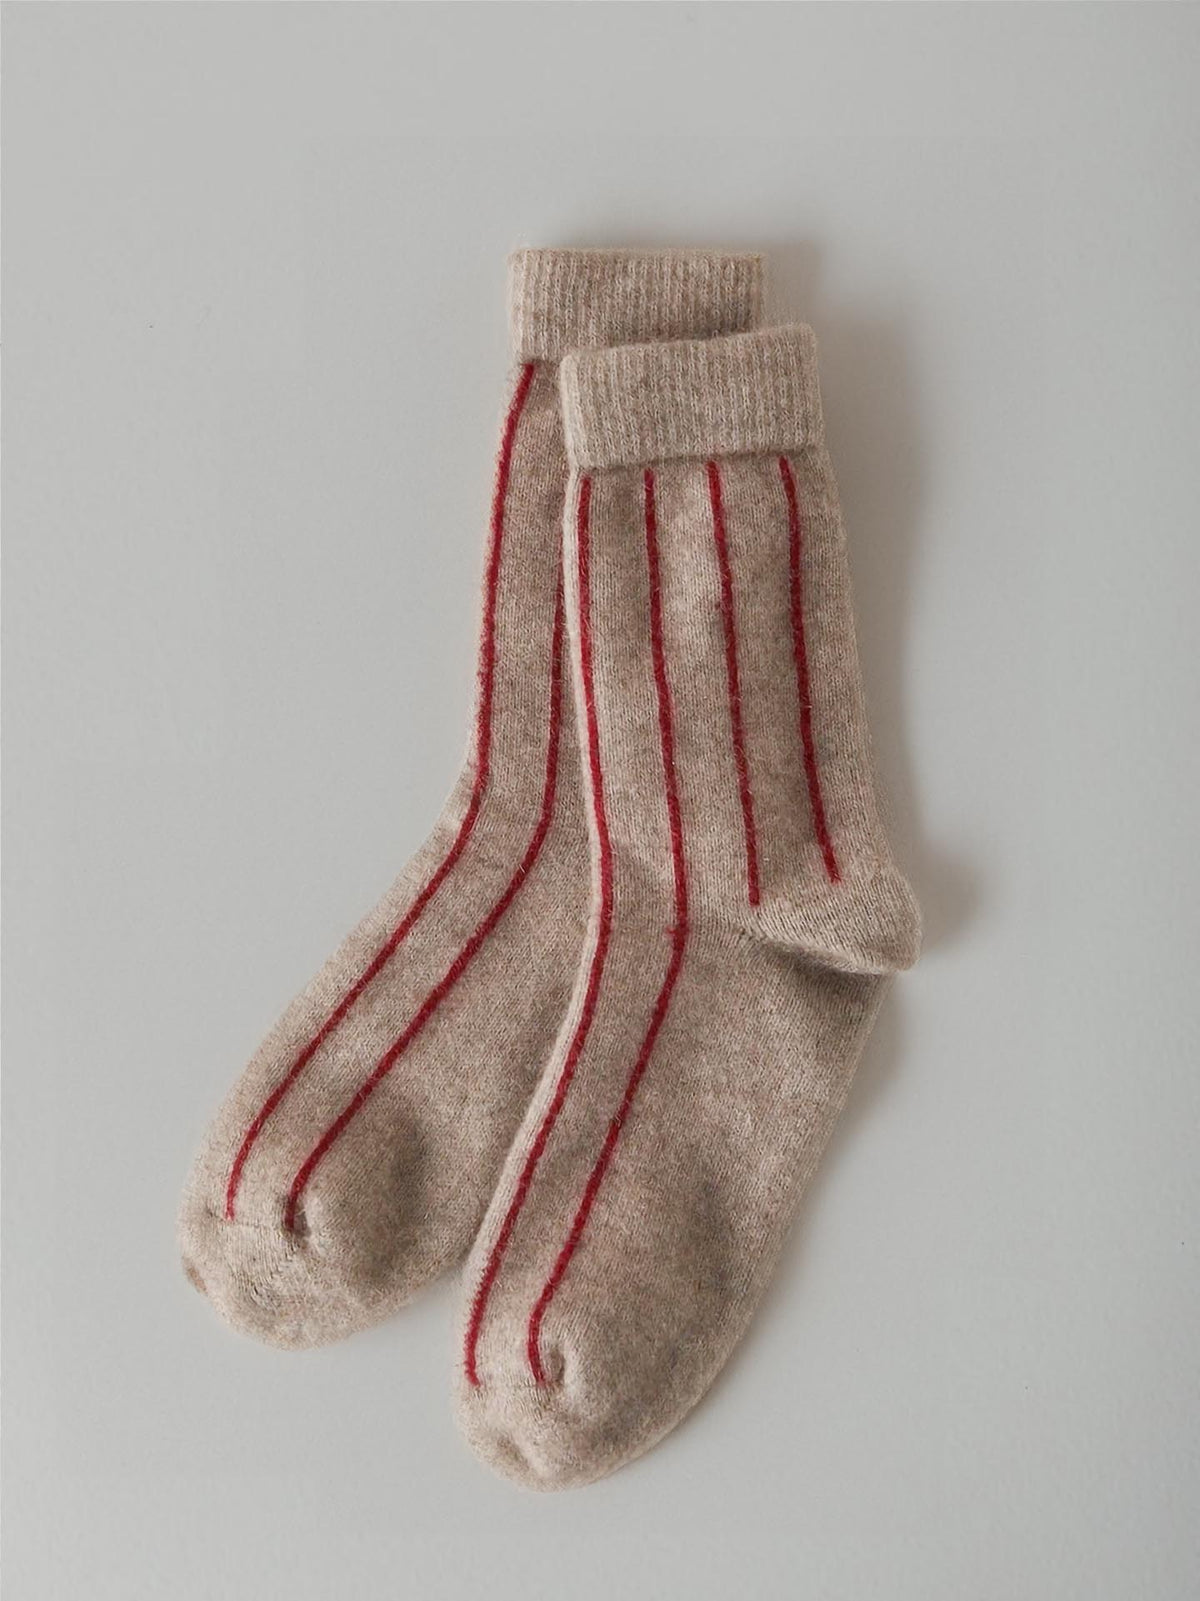 A pair of beige Possum Merino Socks by Francie with red stripes on a light gray background.